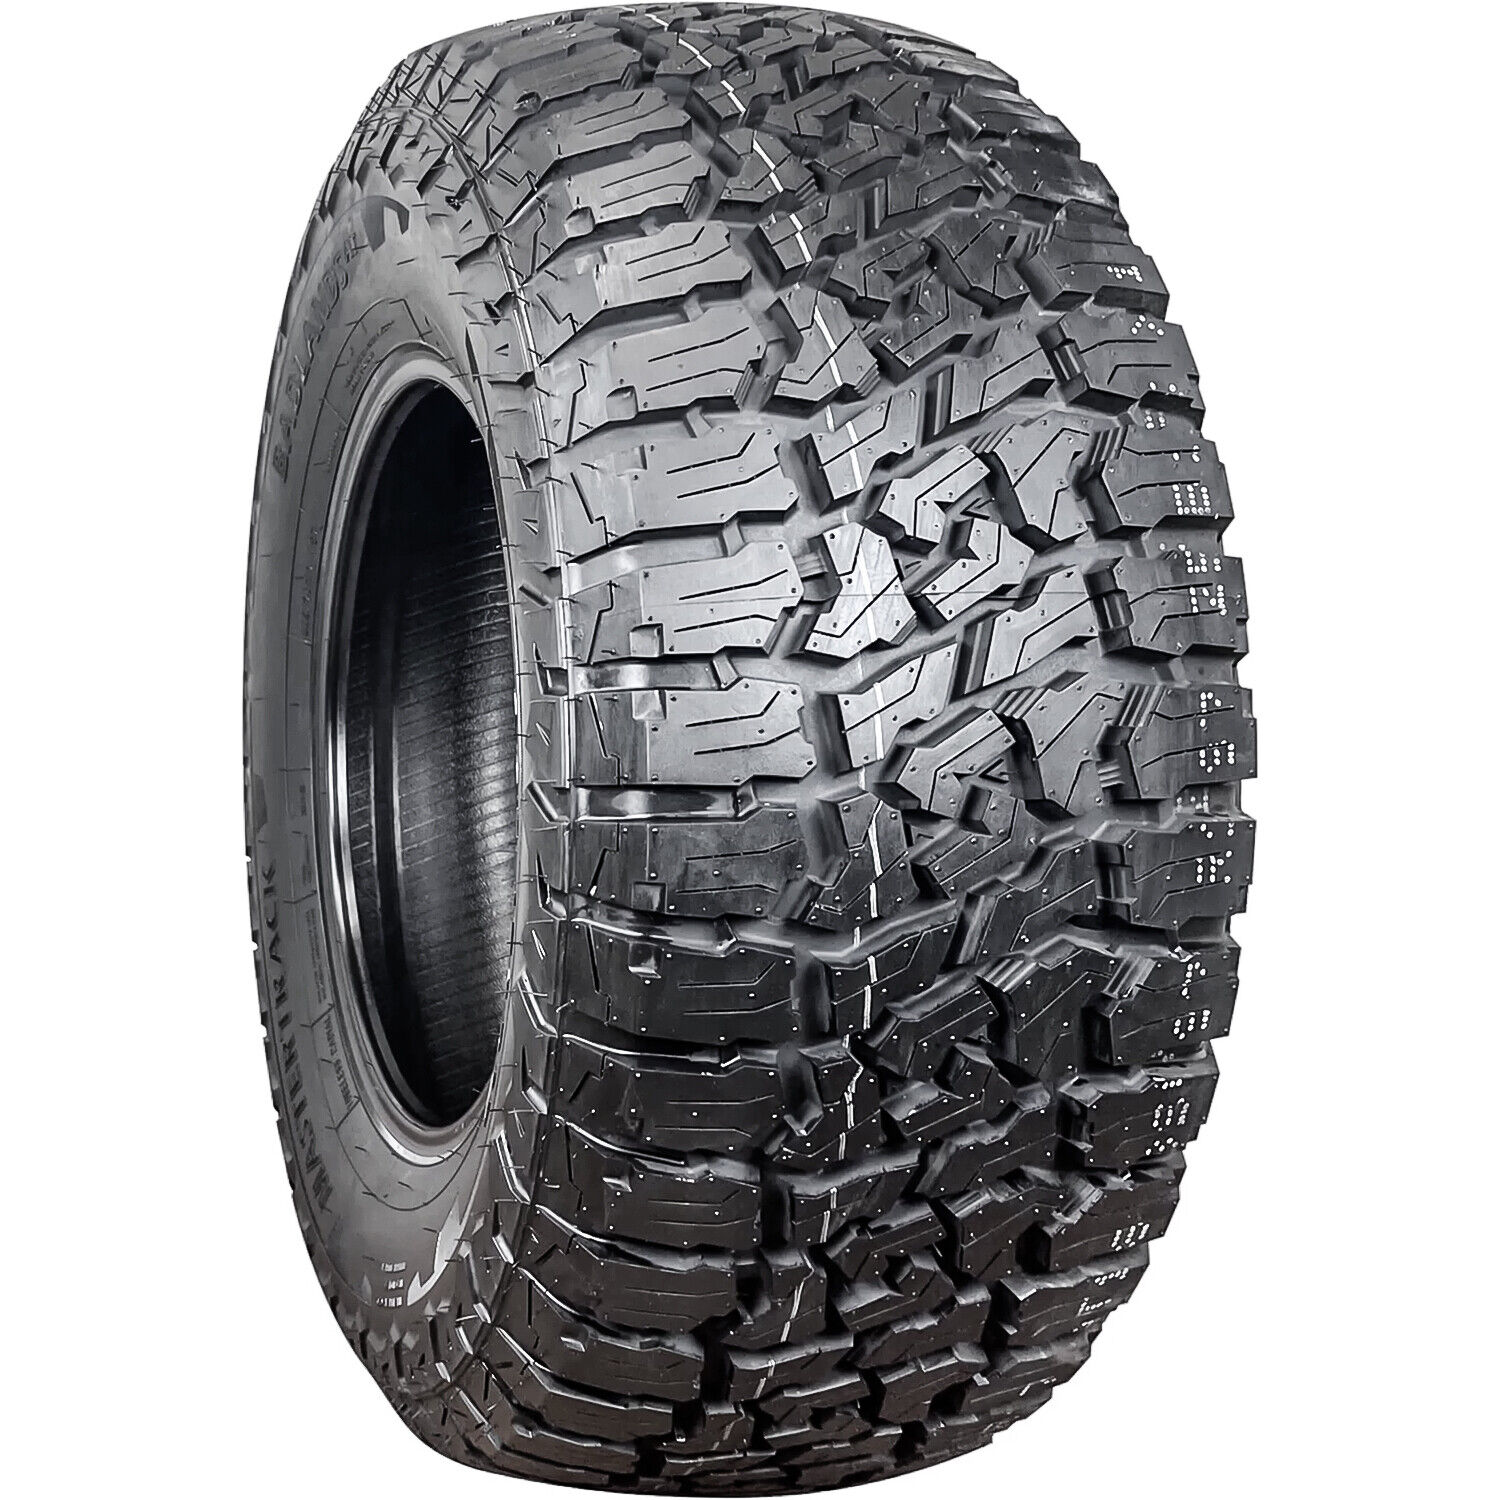 4 Tires Mastertrack Badlands AT LT 275/65R20 Load E 10 Ply A/T All Terrain